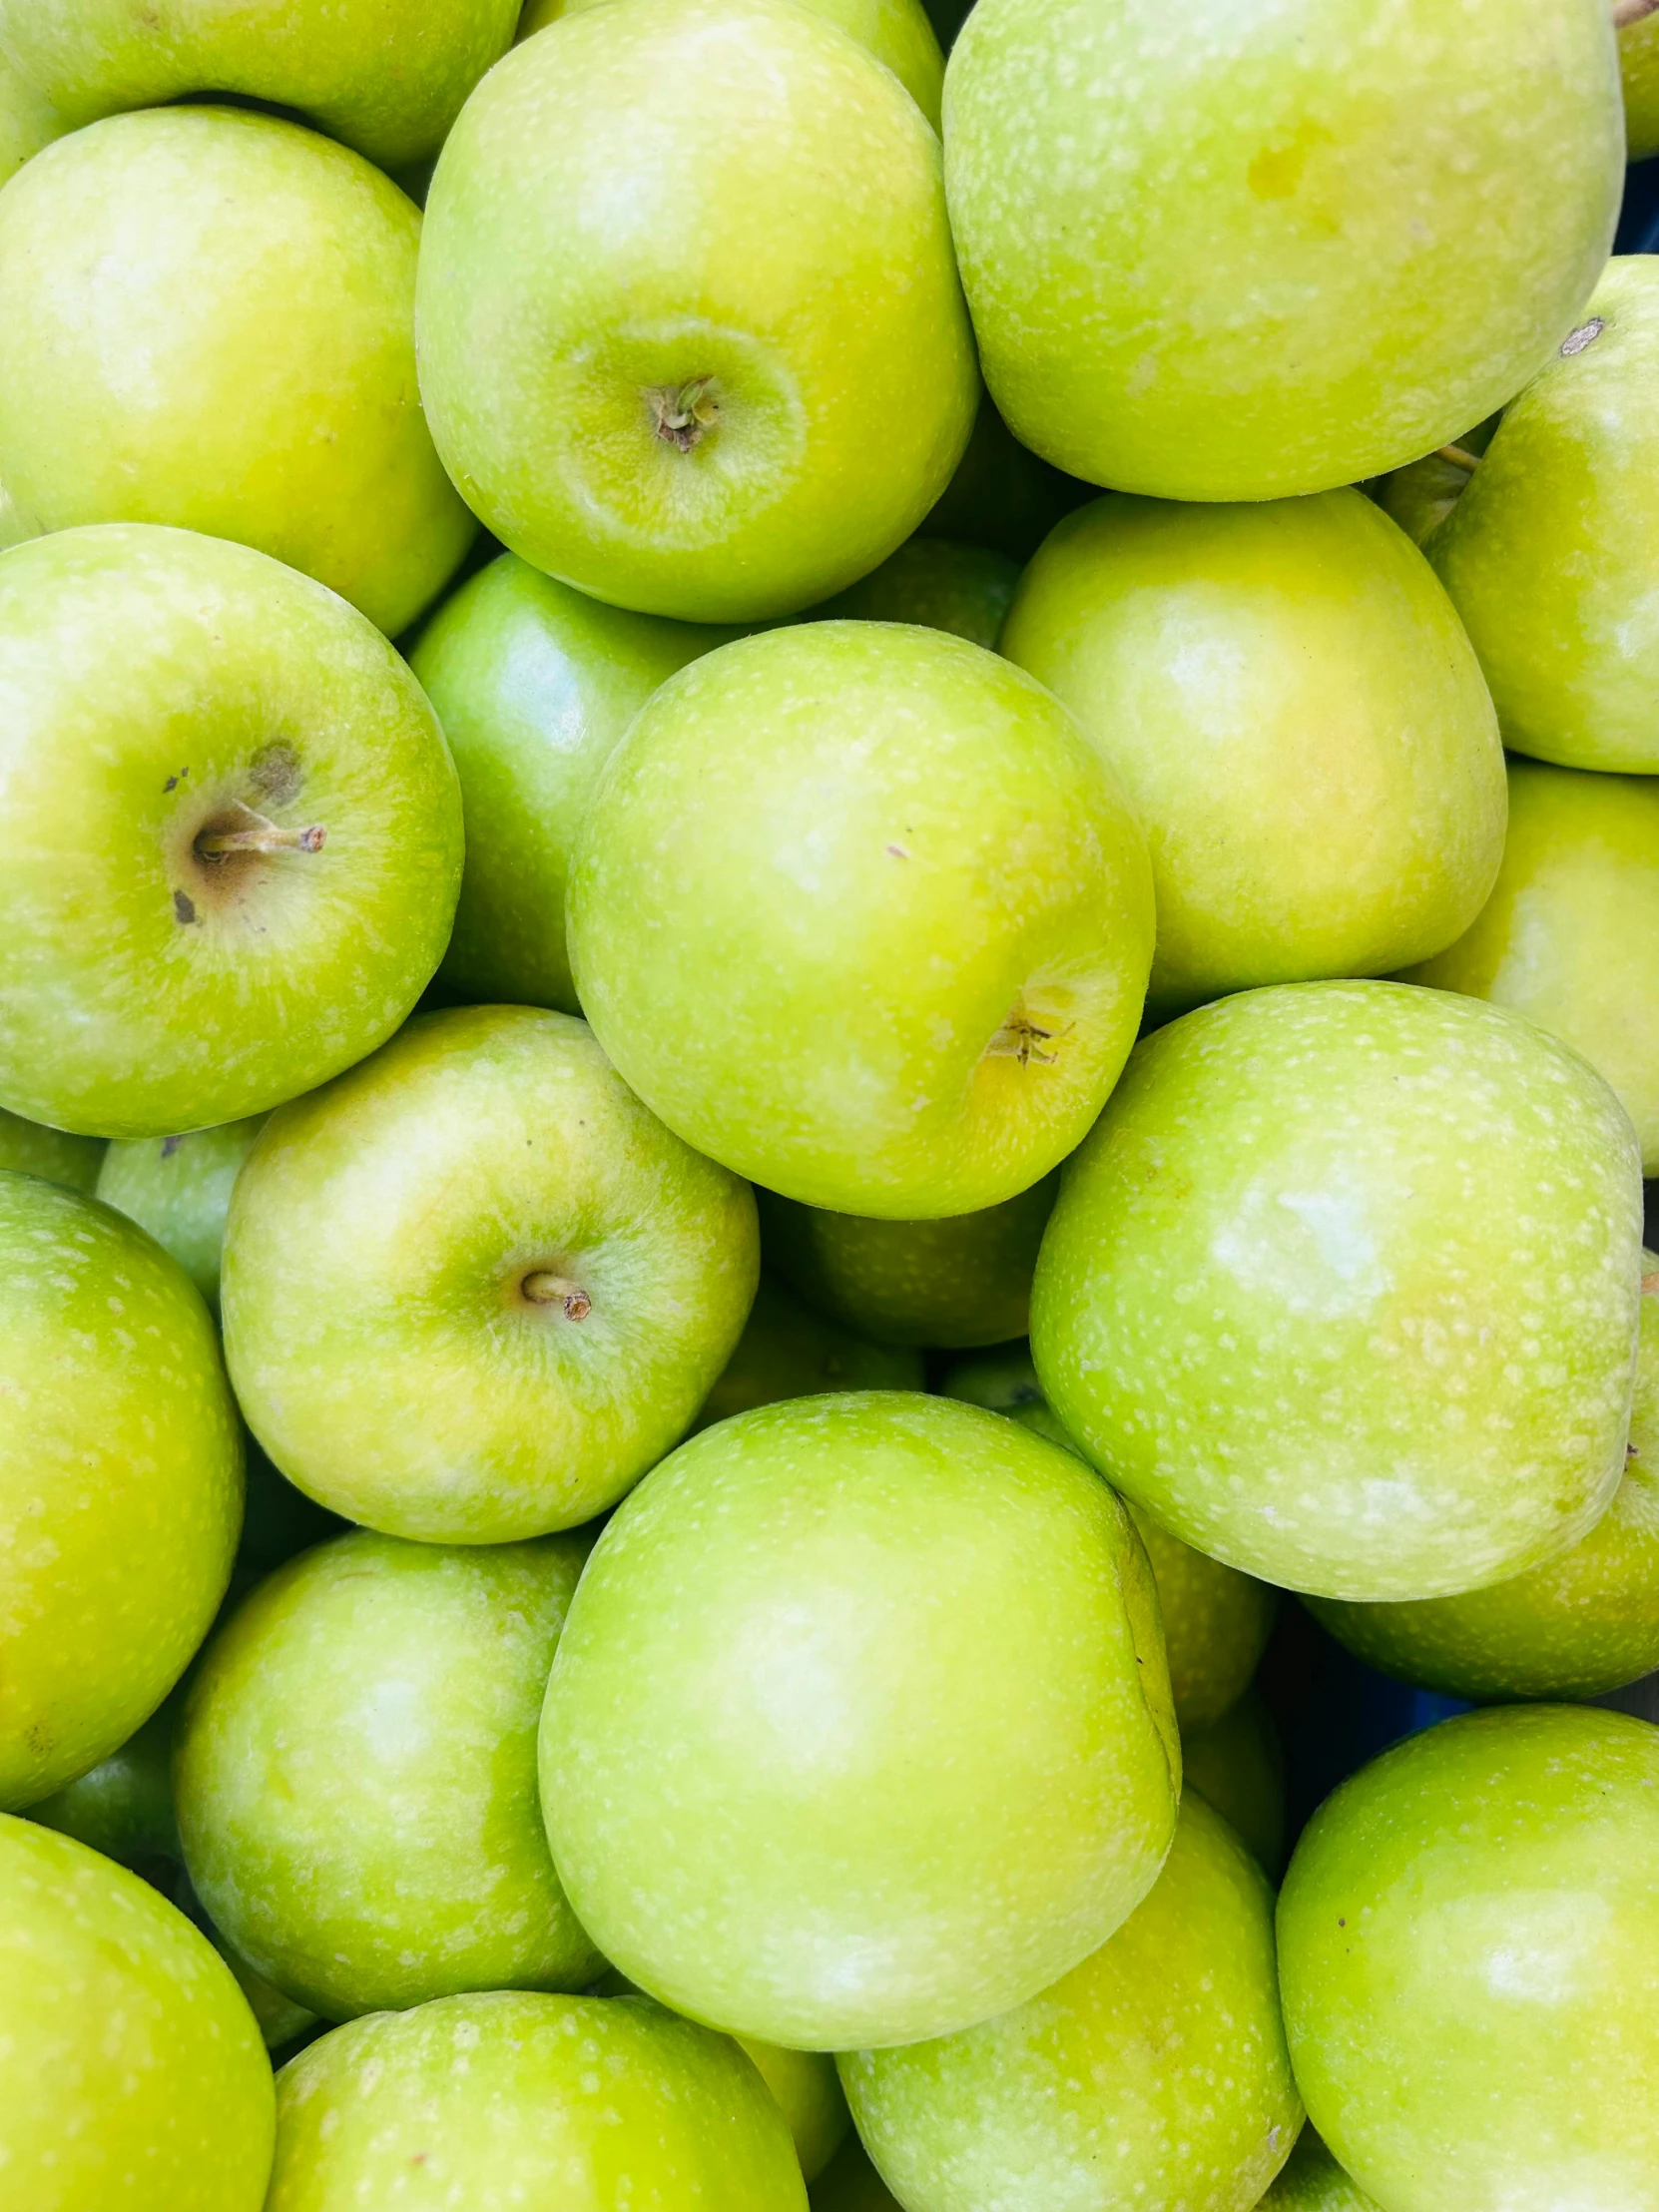 green apples stacked on top of each other in rows